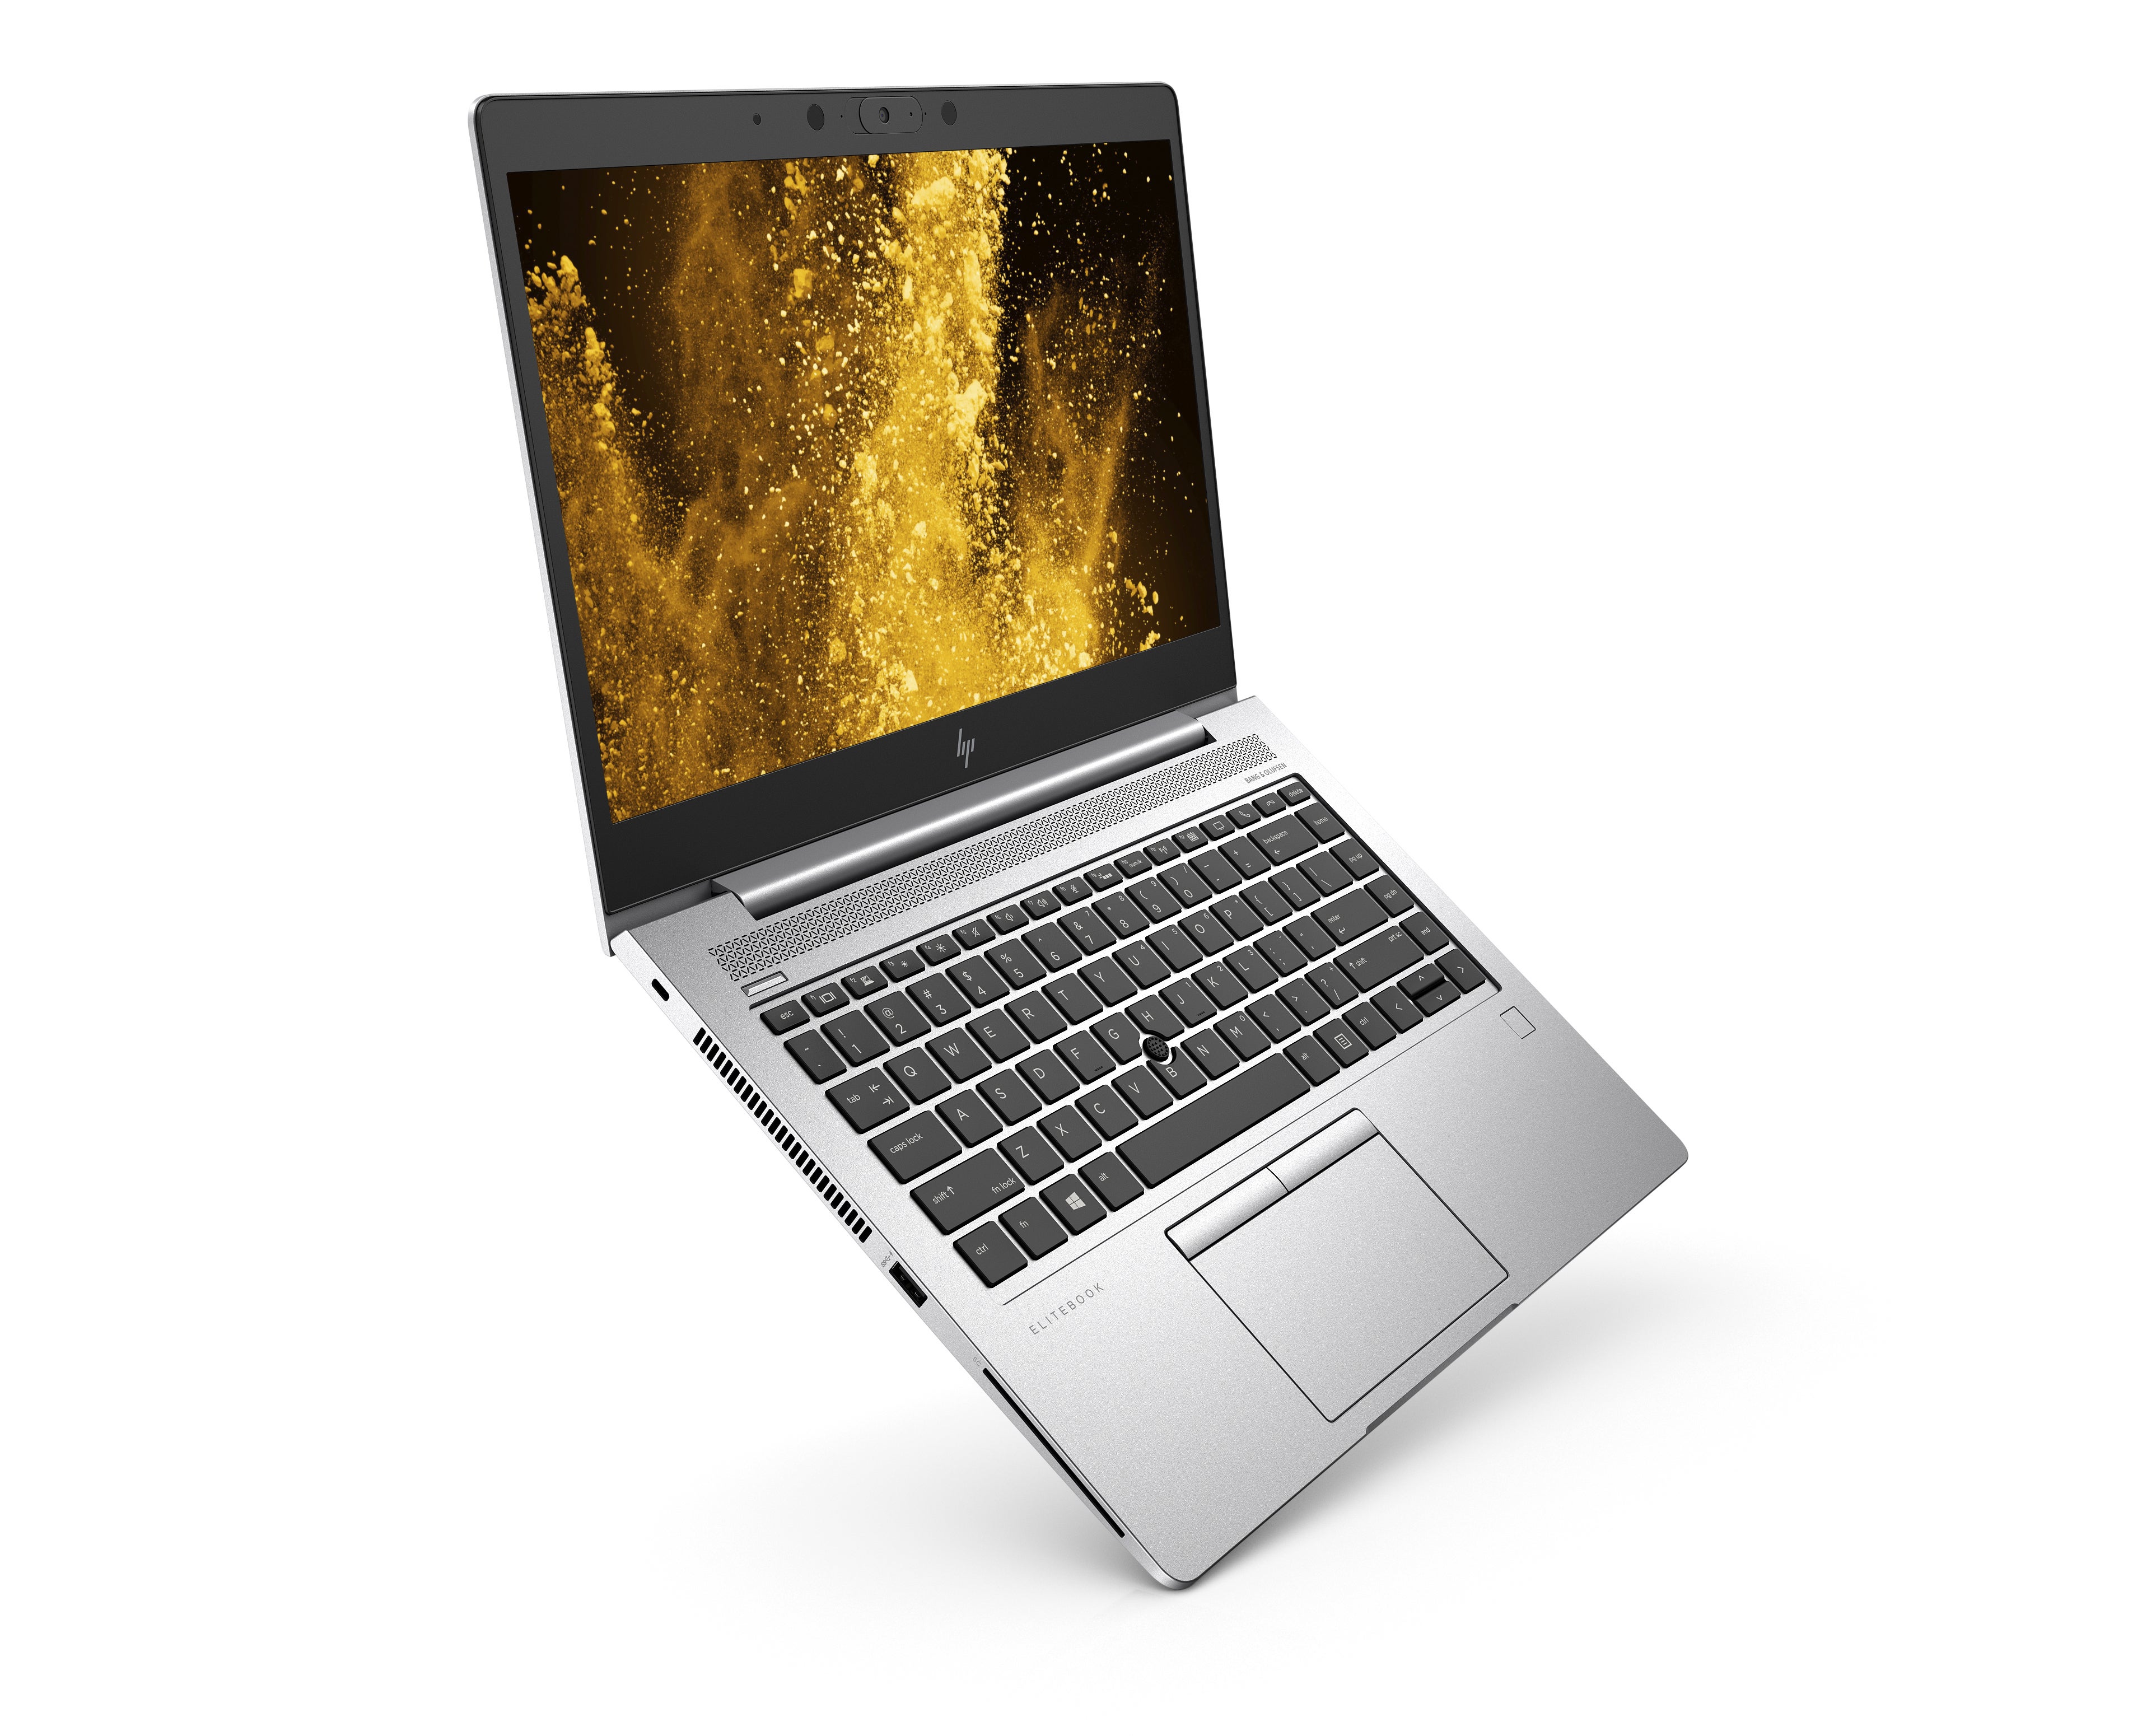 Hps Elitebook 800 G6 Notebook Series Adds Convenience Privacy Features Pcworld 3305